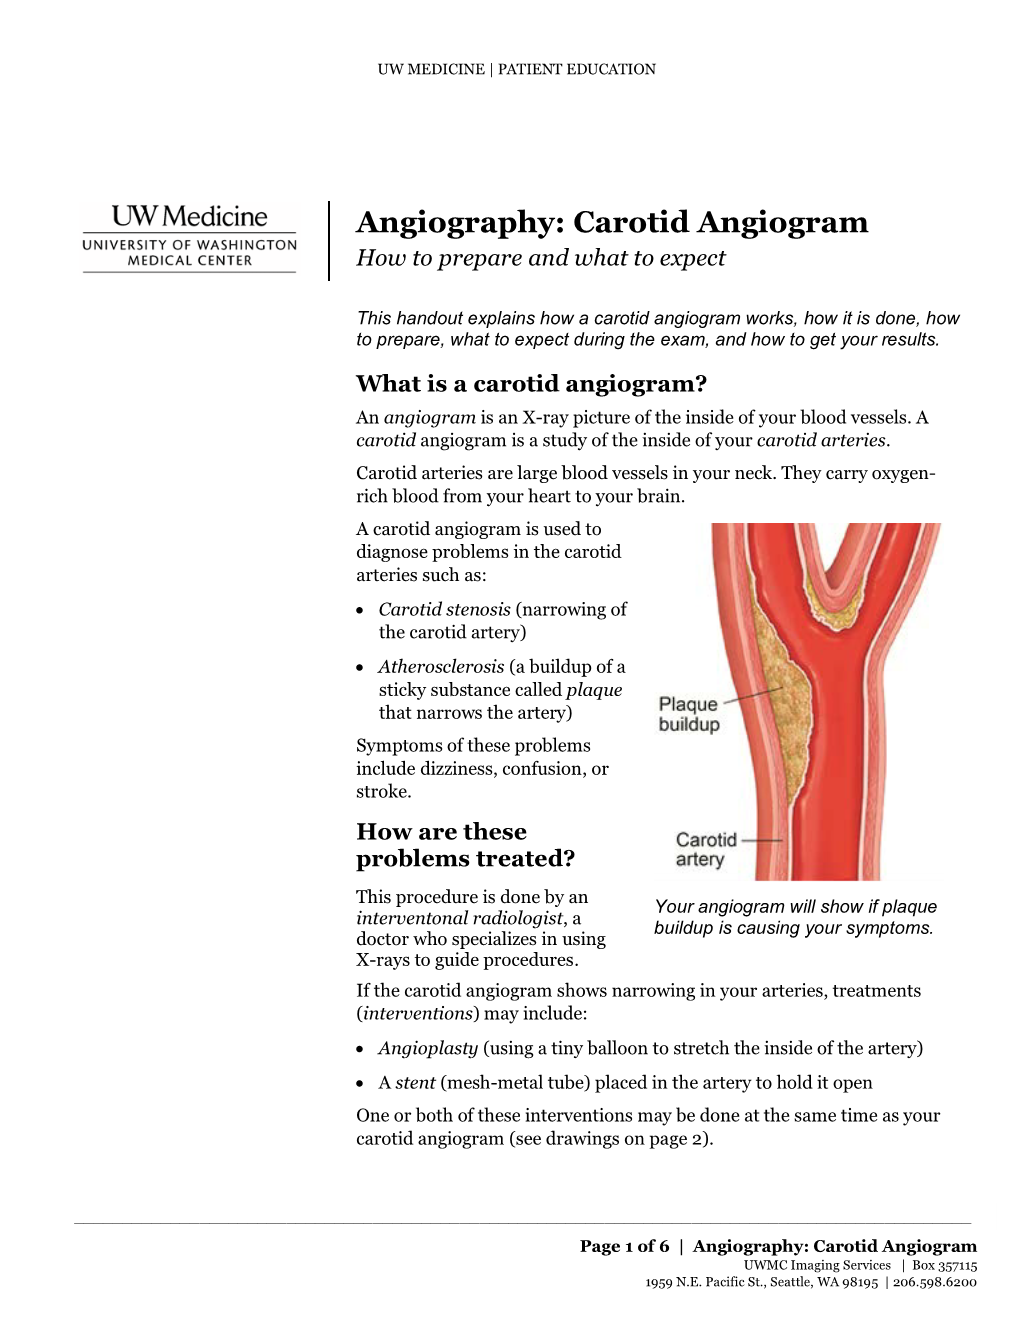 Carotid Angiogram | How to Prepare and What to Expect |